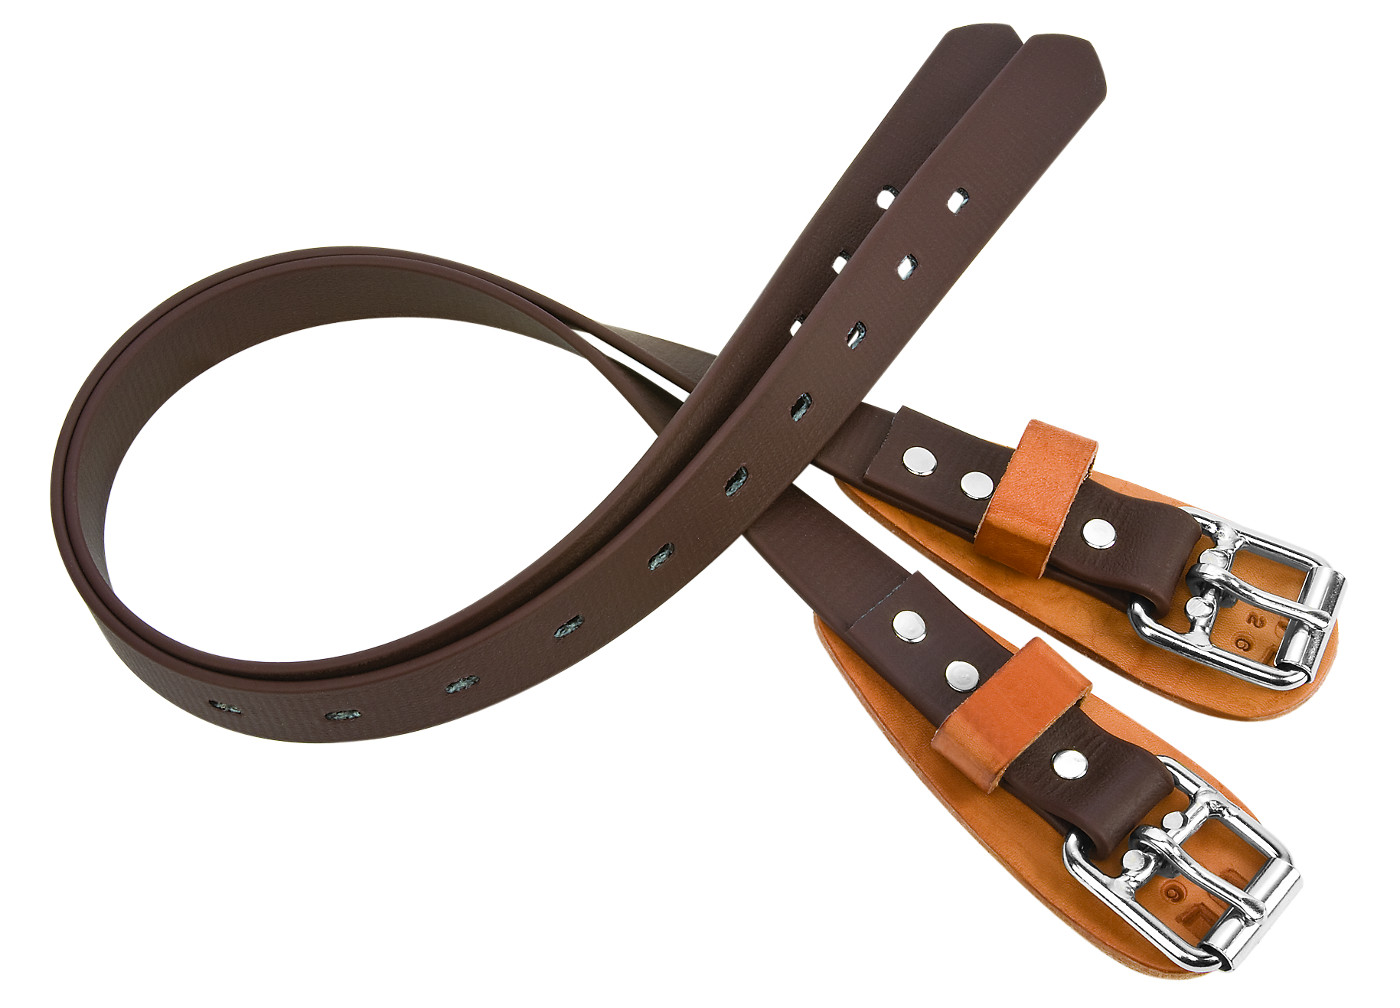 Pair of Upper Climber Straps — 26 inches